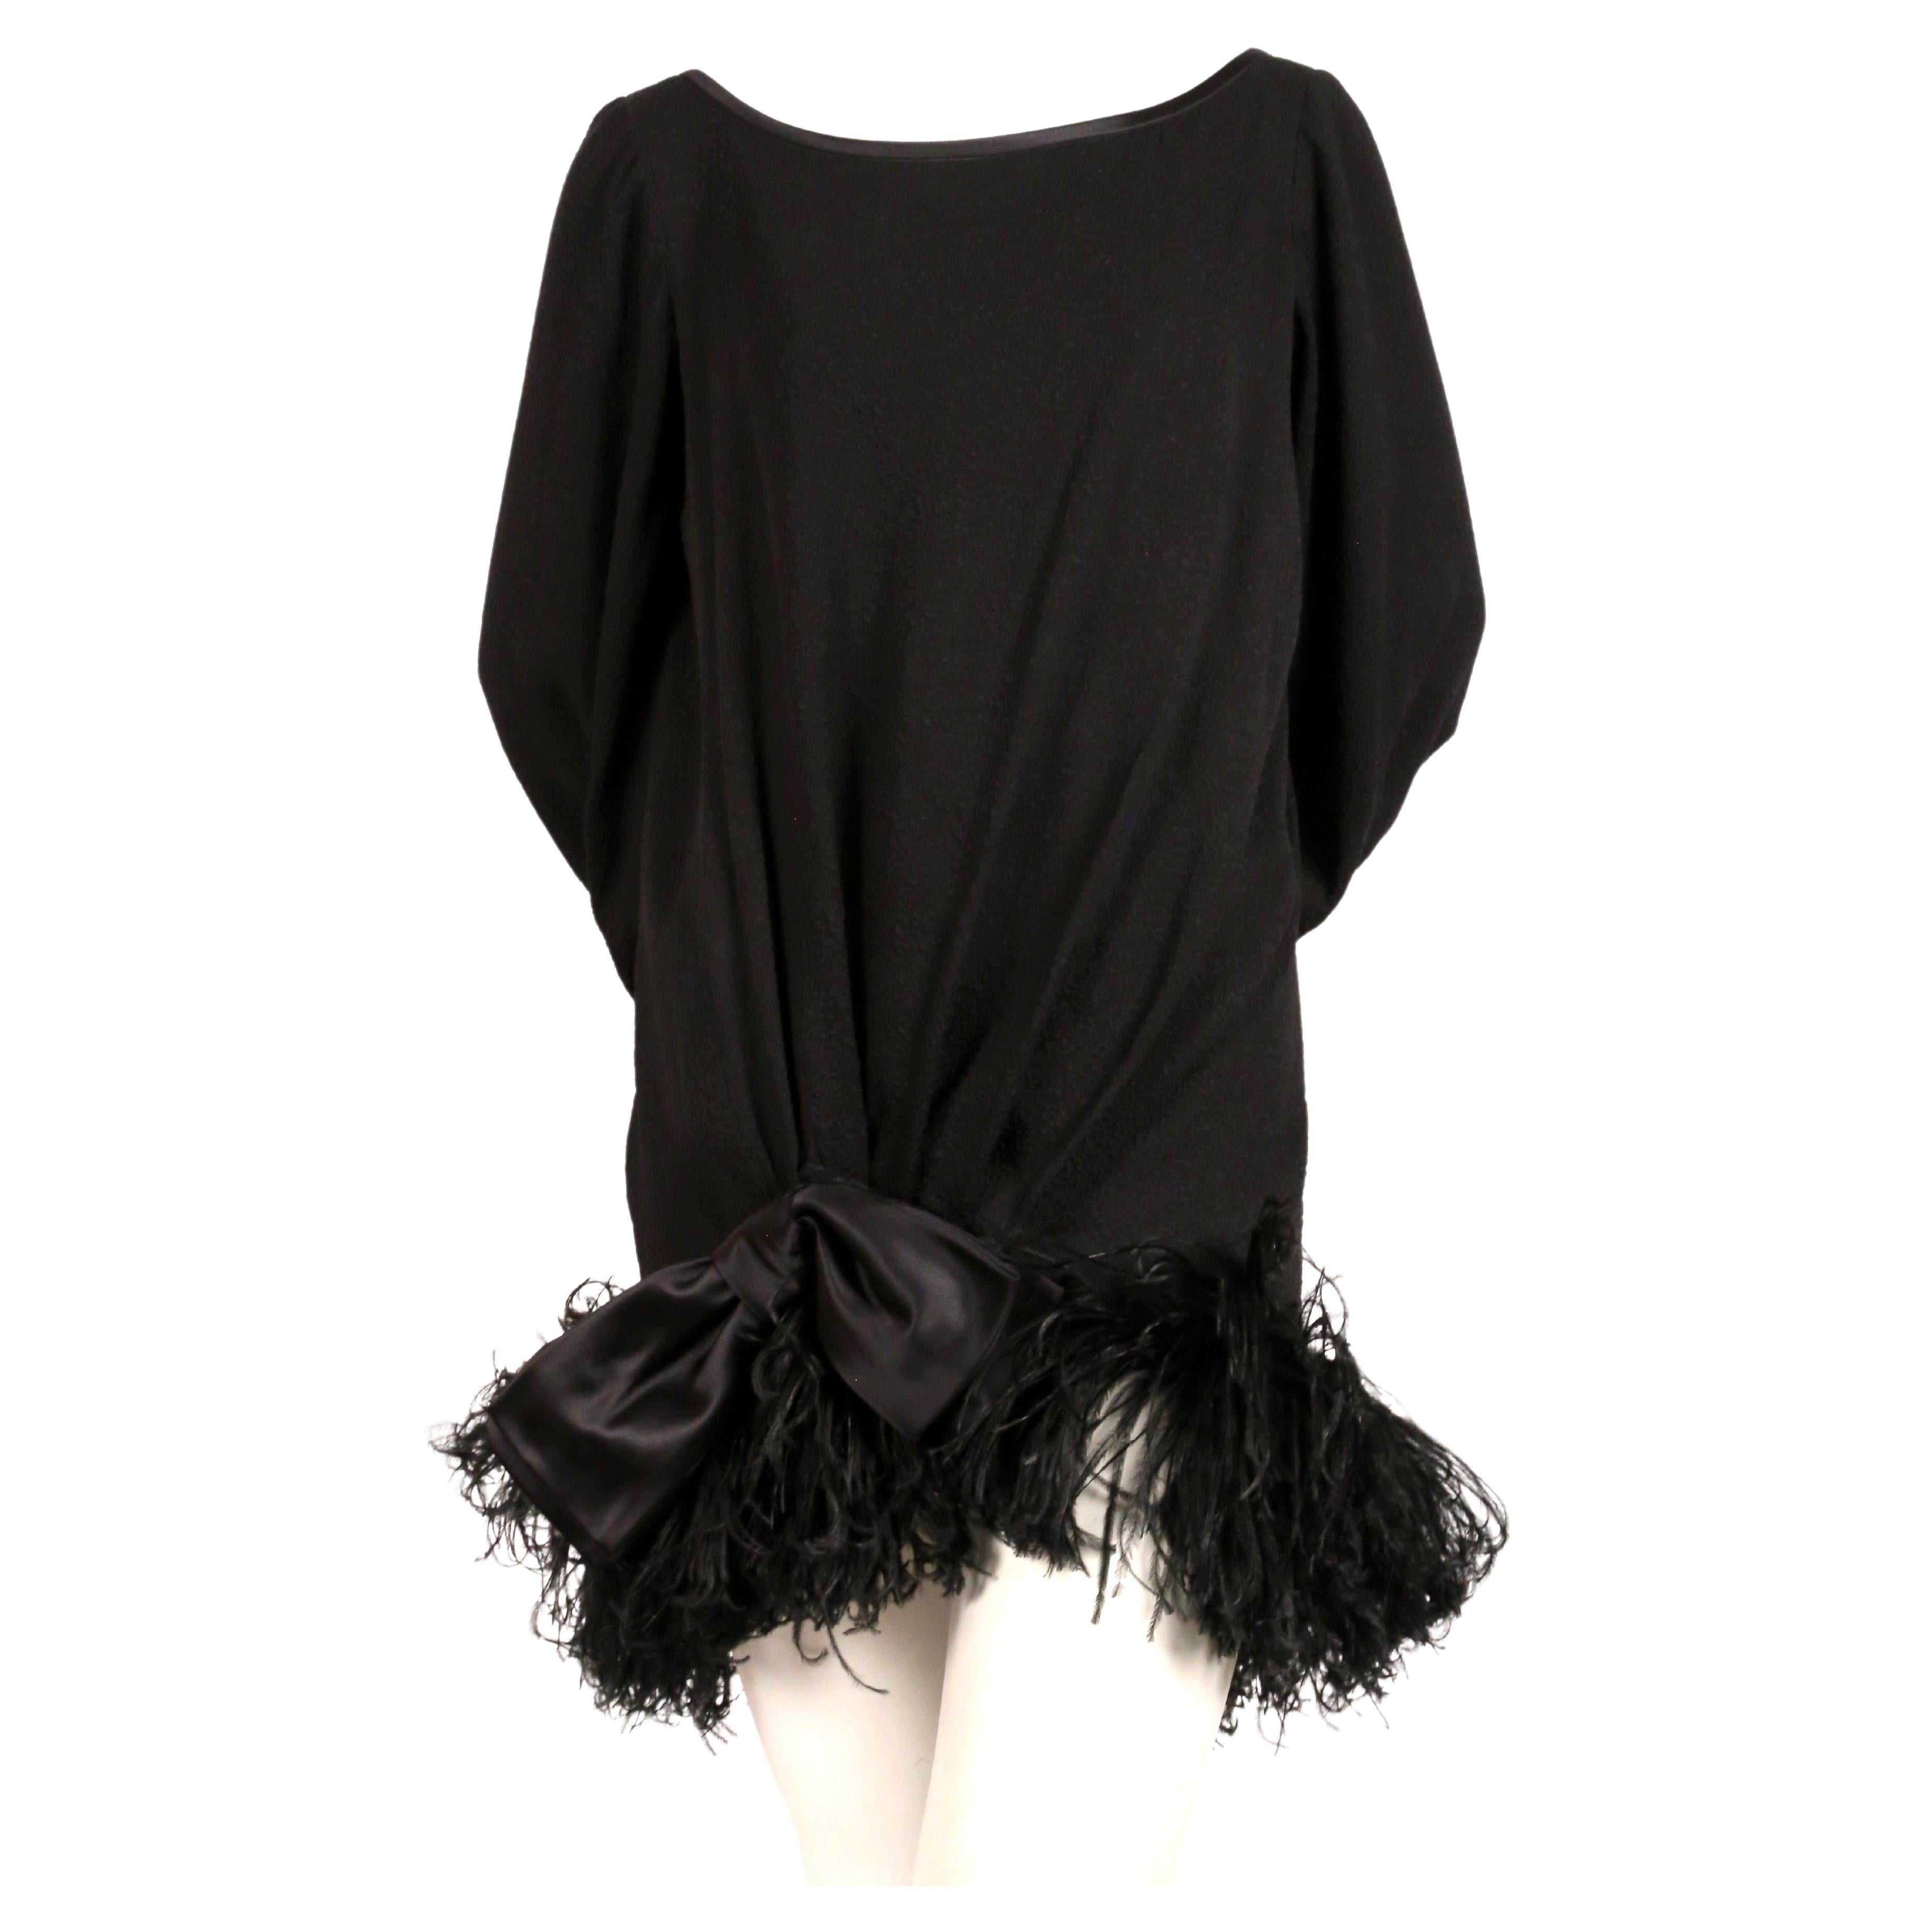 Black crepe silk mini dress with marabou feather trim and satin bow designed by Yves Saint Laurent dating to the late 1970's. Labeled a French size 38. Approximate measurements: shoulder 15.5